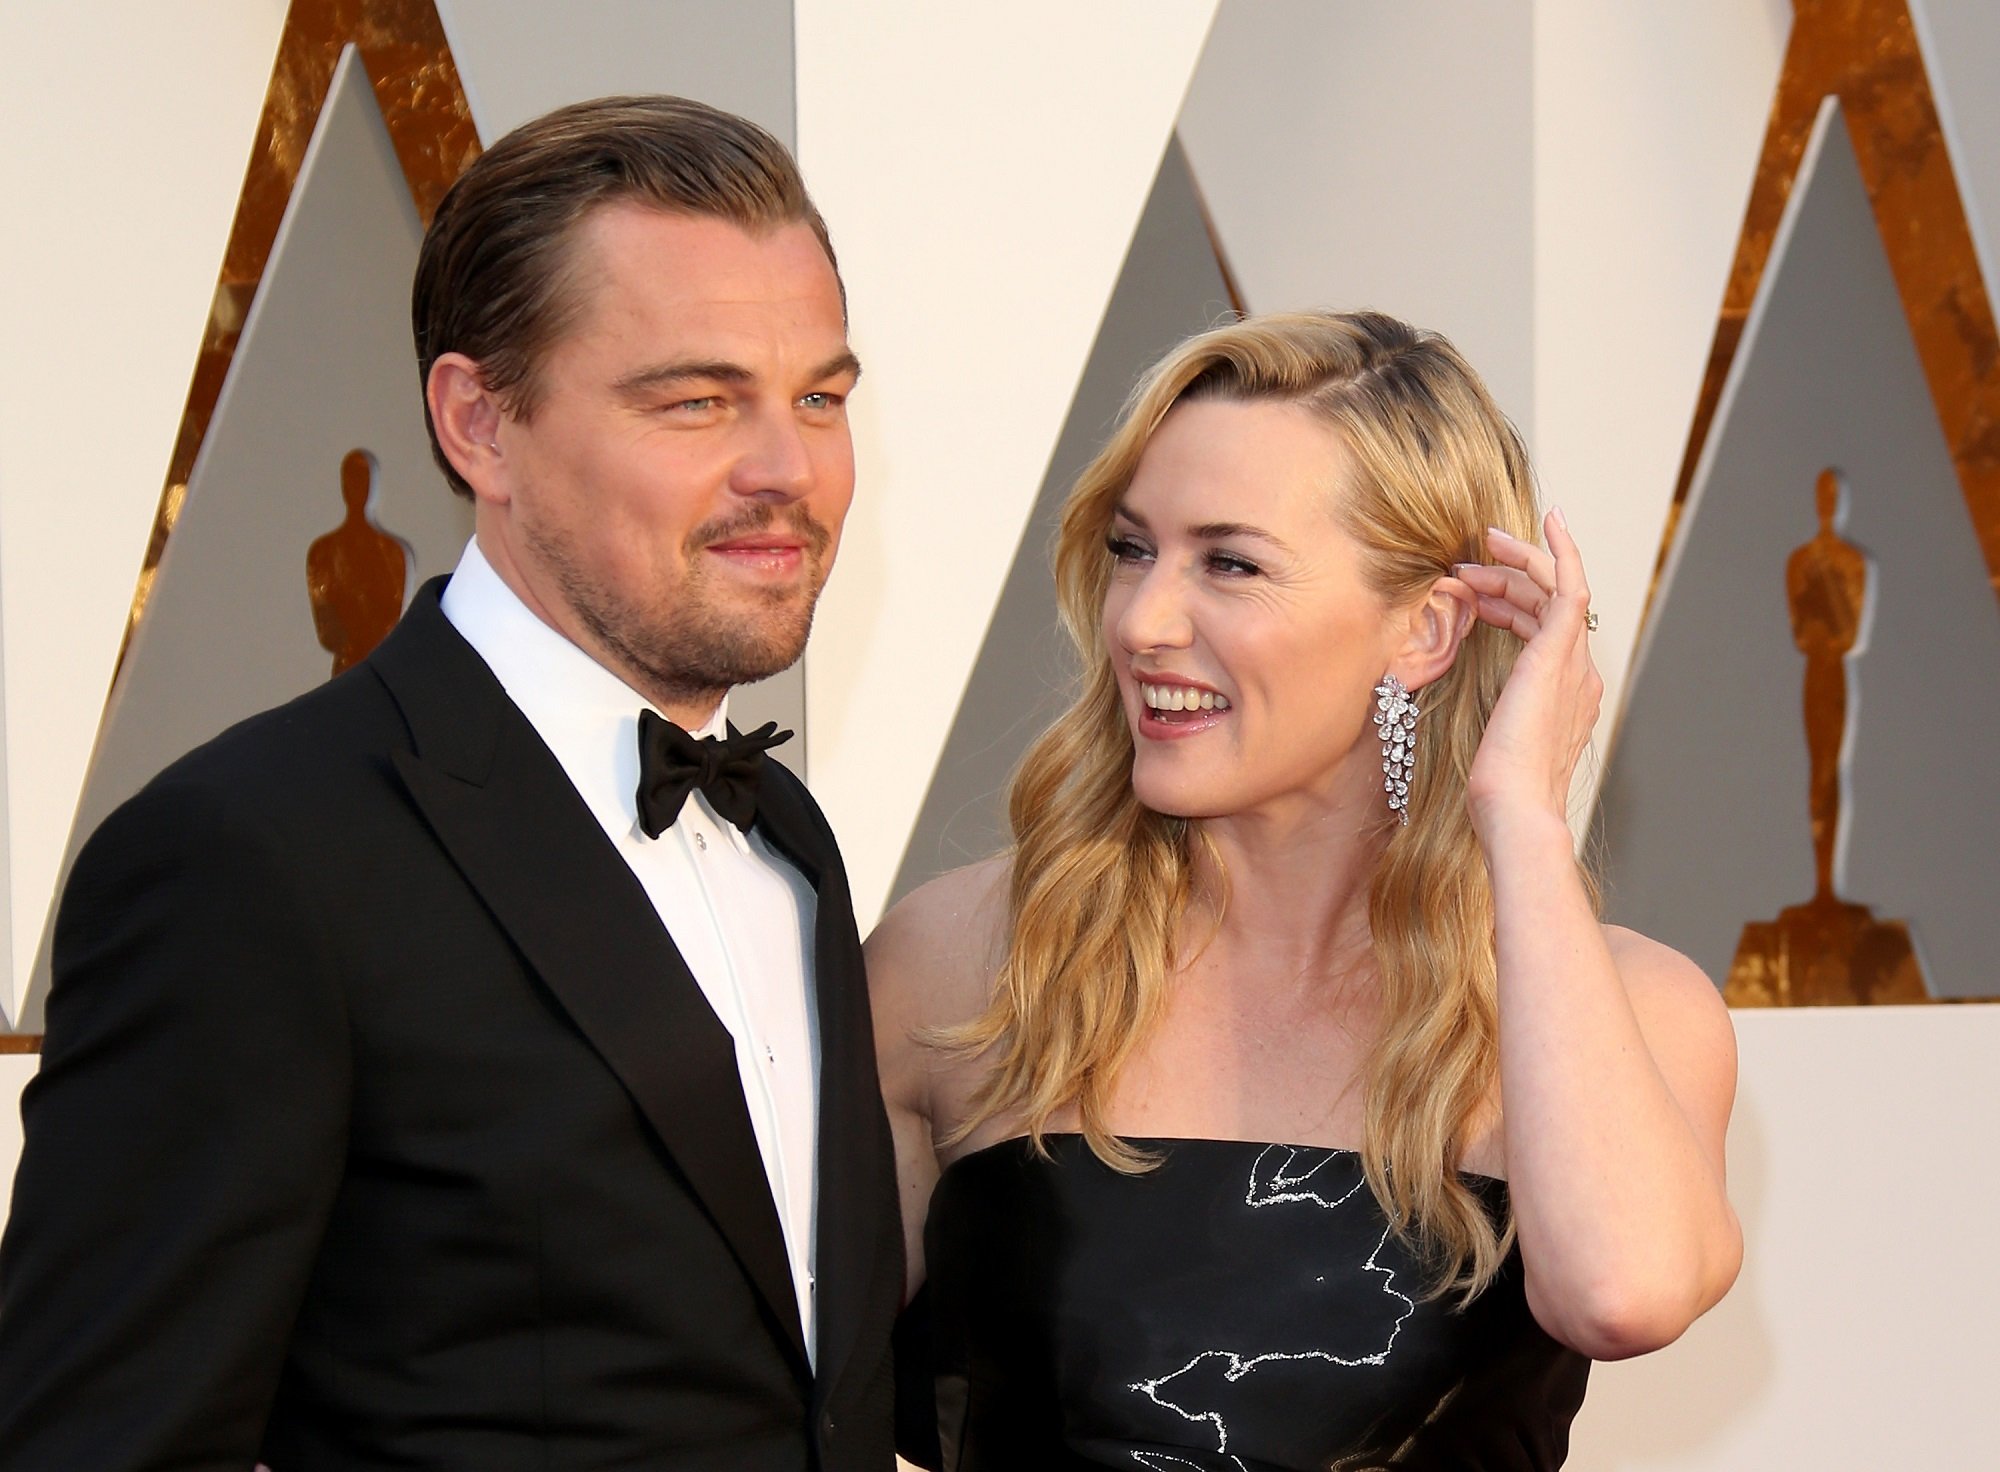 Leonardo DiCaprio and Kate Winslet at the 88th Annual Academy Awards in 2016